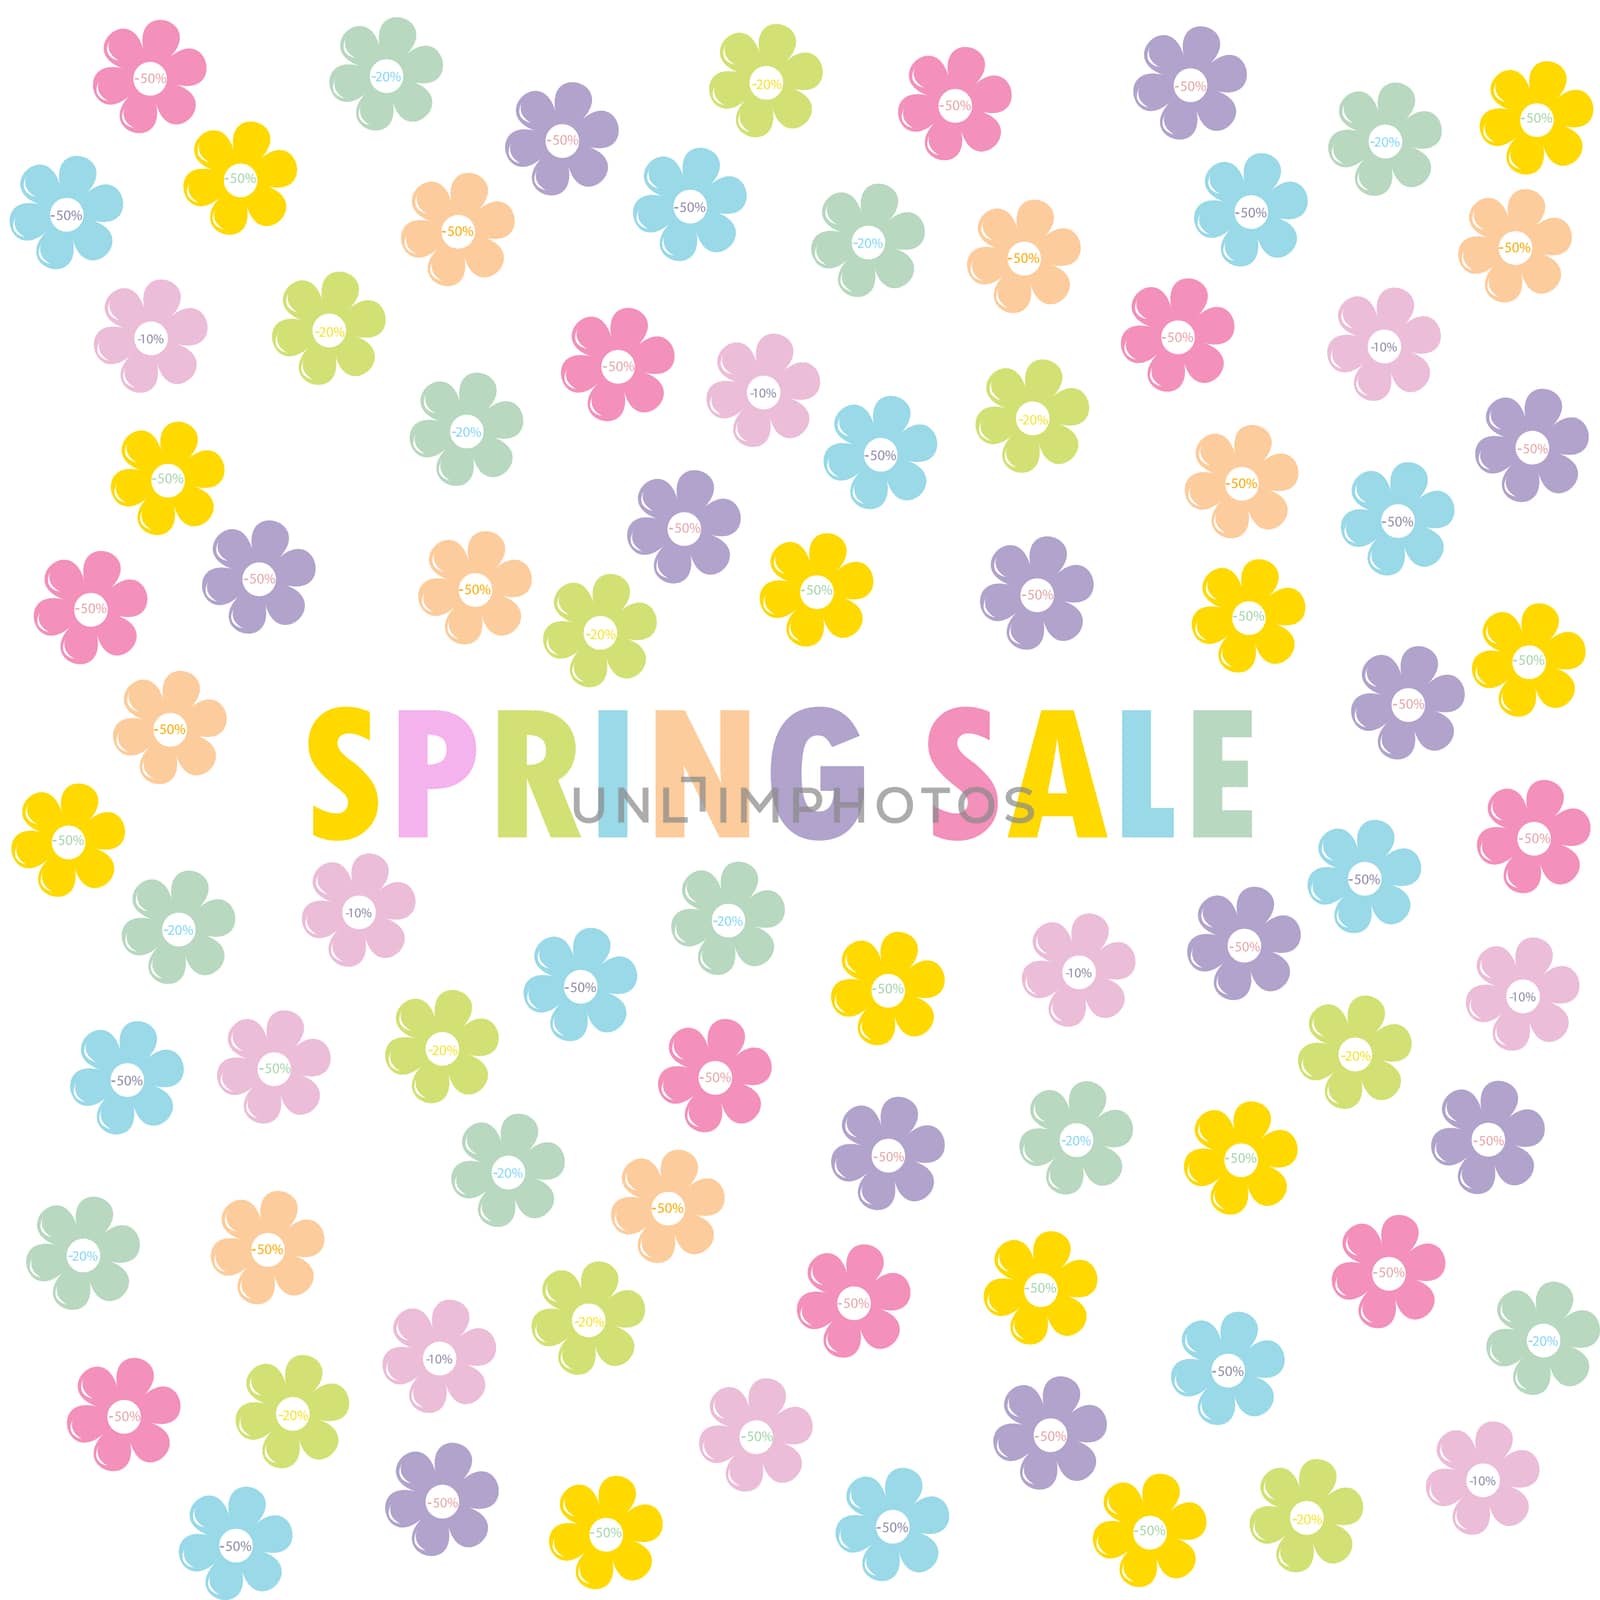 Spring sale concept with flowers by hibrida13